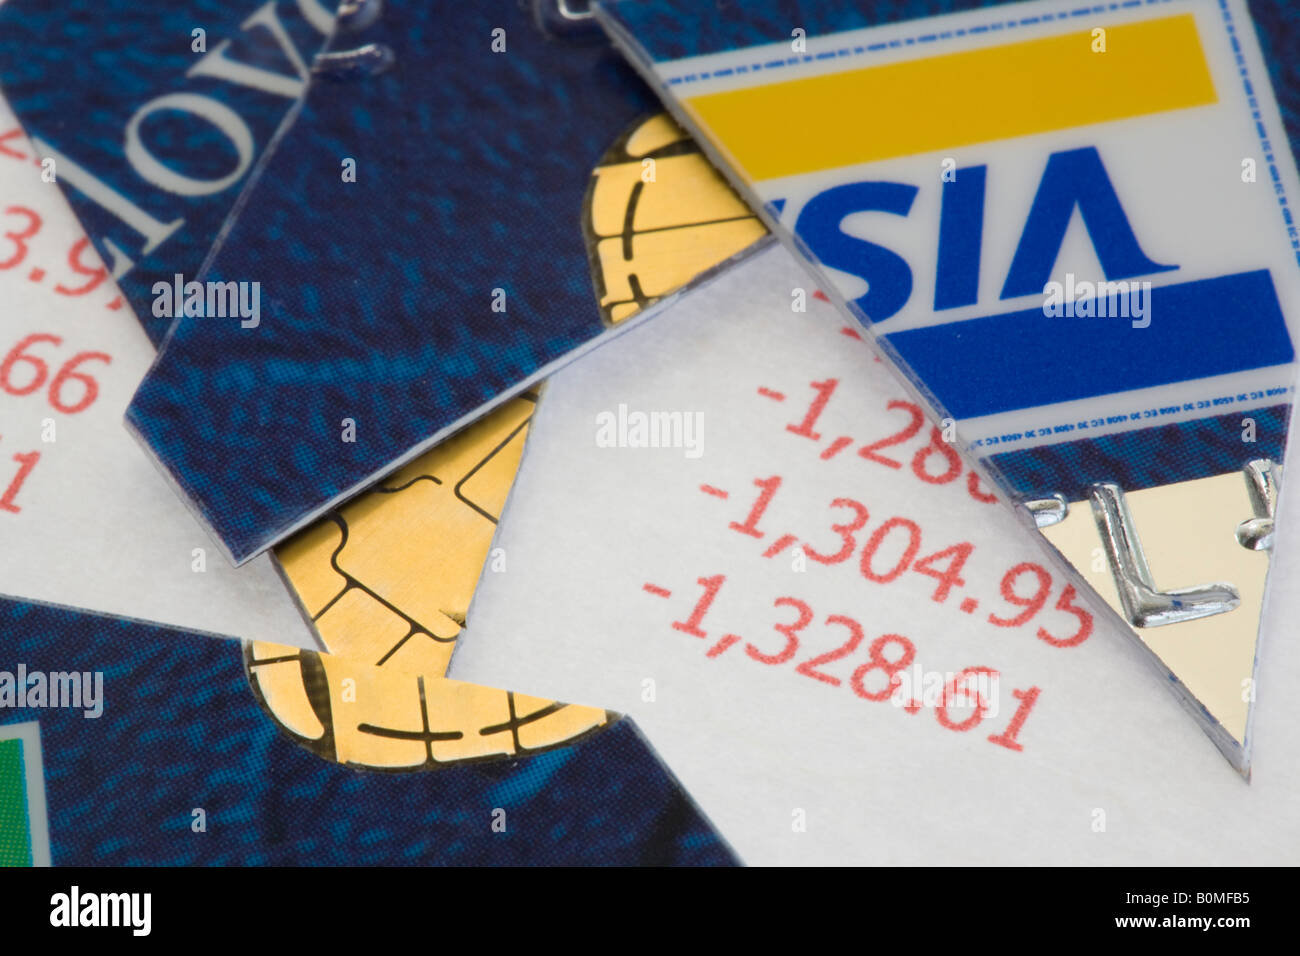 Cut Visa credit card in pieces on statement in red in close up Stock Photo  - Alamy